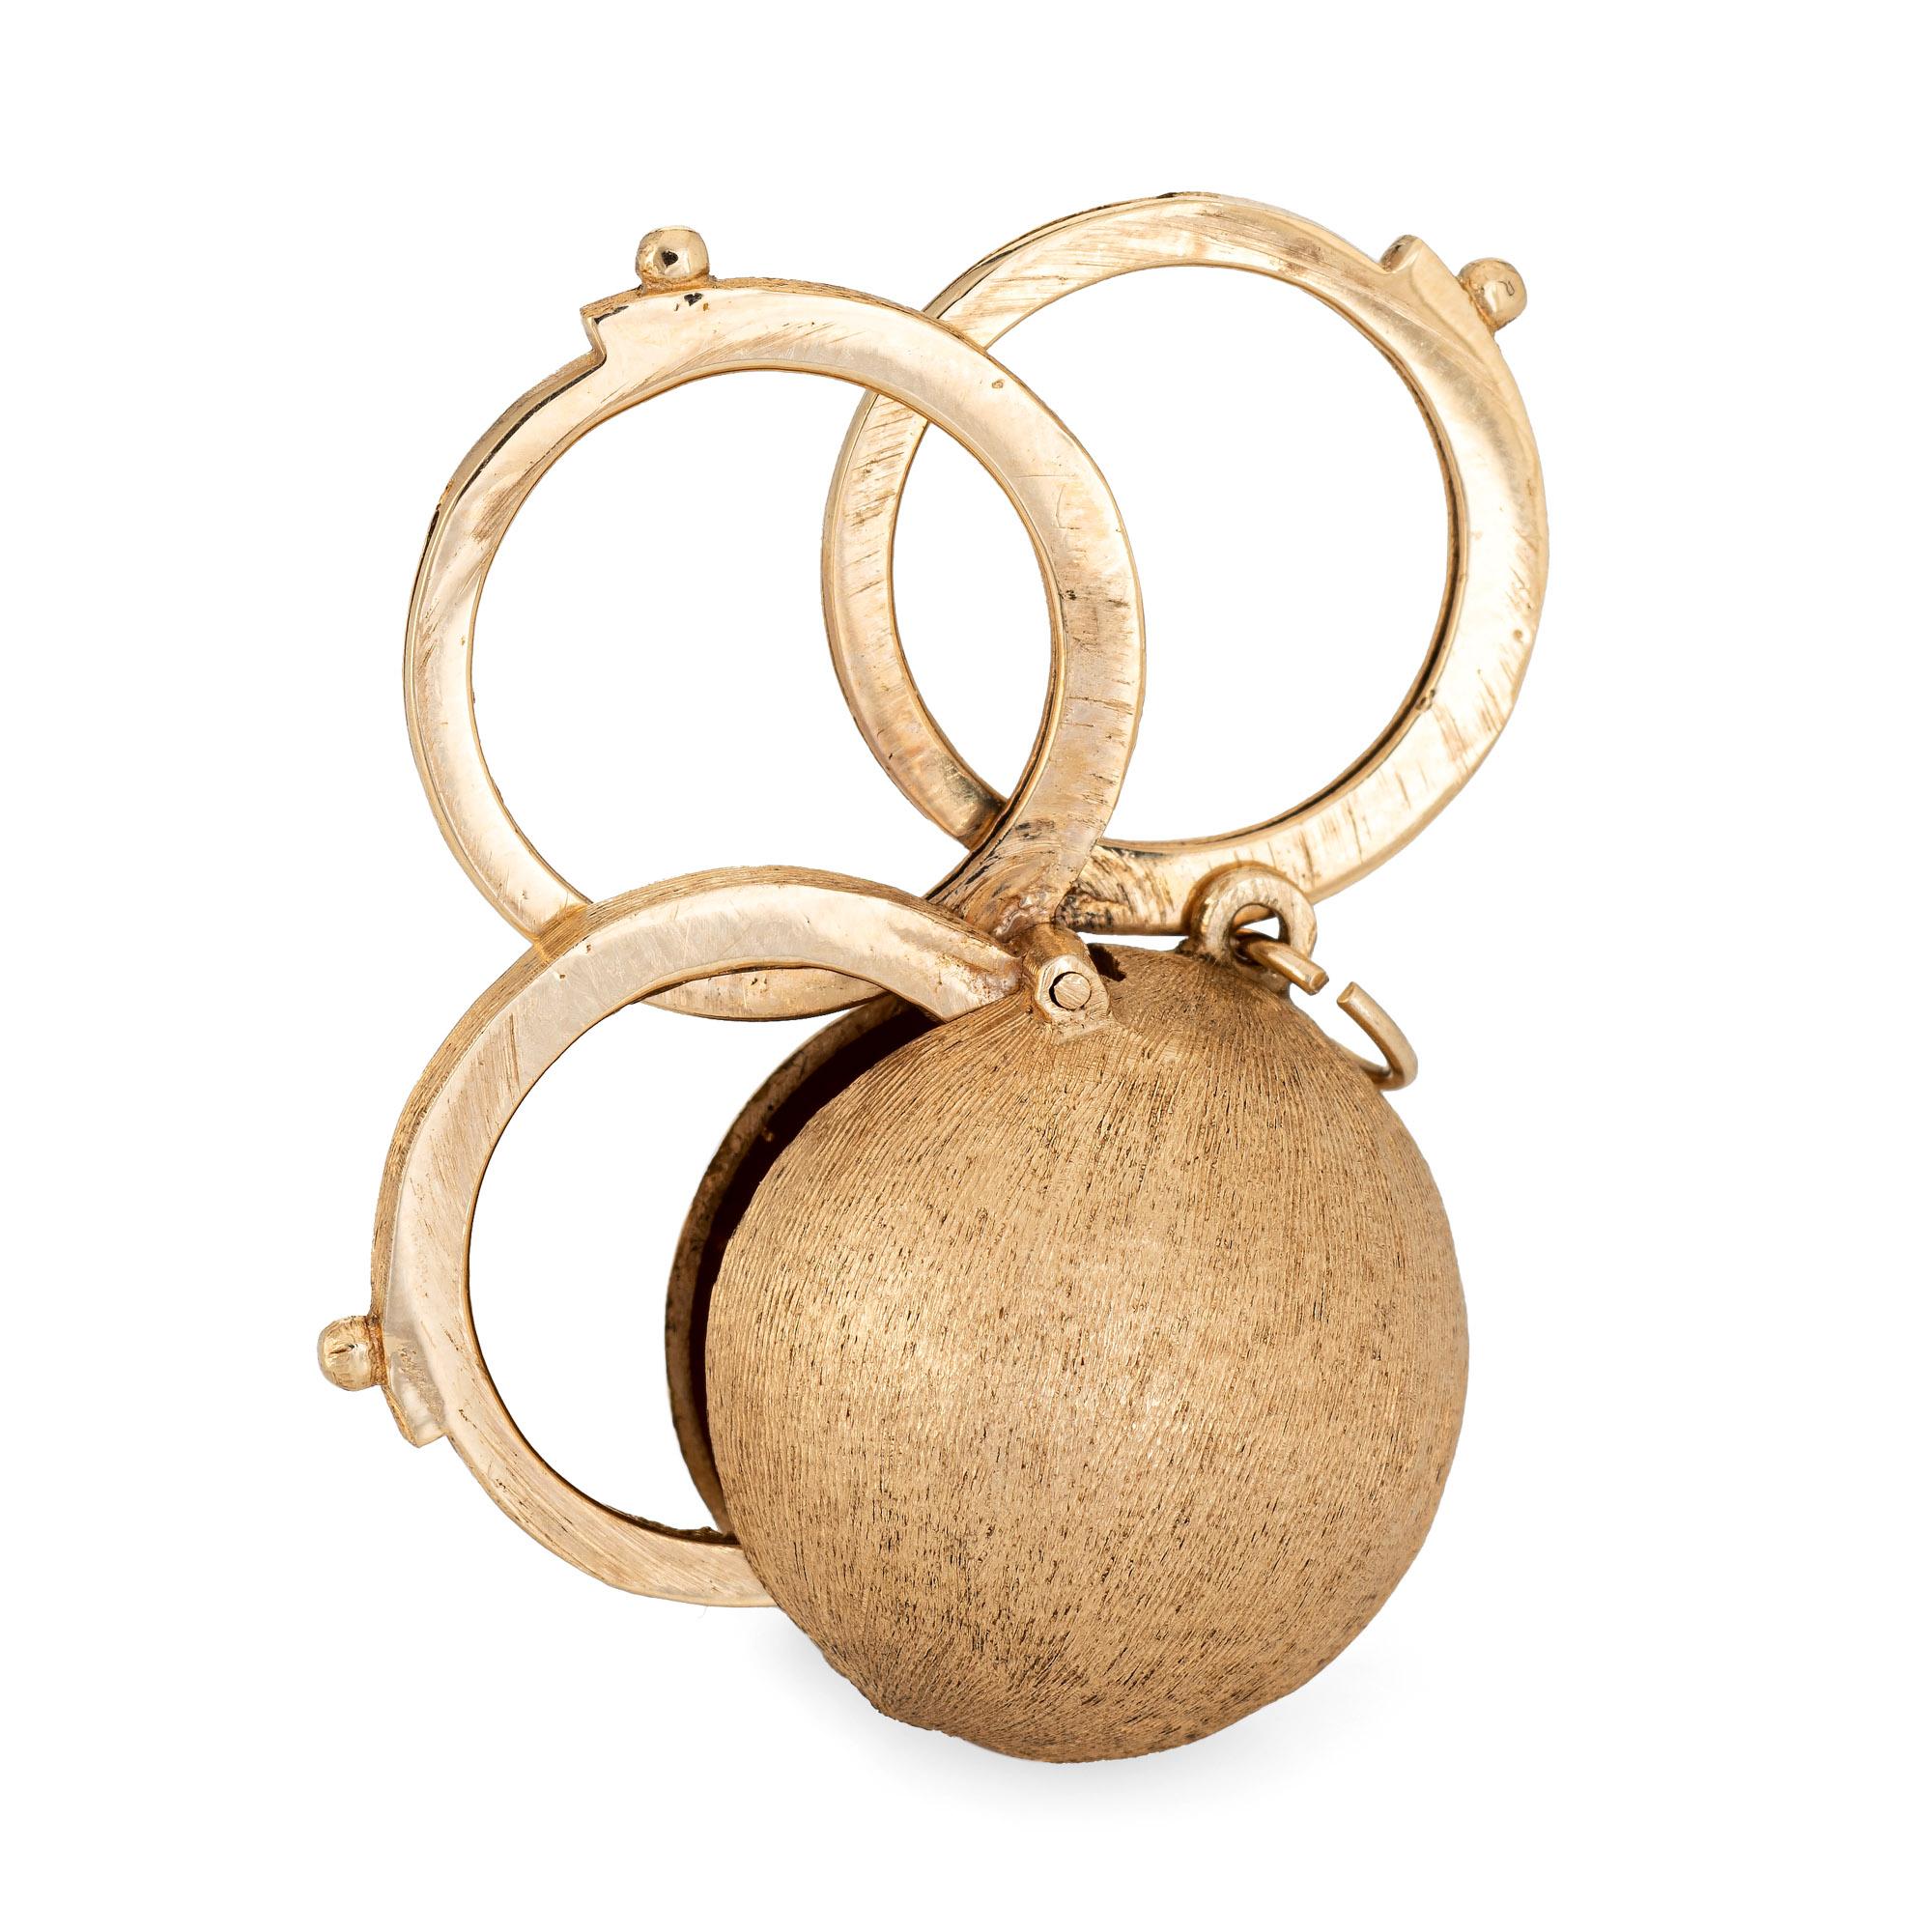 Finely detailed vintage folding picture charm (circa 1960s) crafted in 14 karat yellow gold. 

The orb features three picture frames that expand and retract flush into the orb in one fluid movement. A total of three picture frames are located within